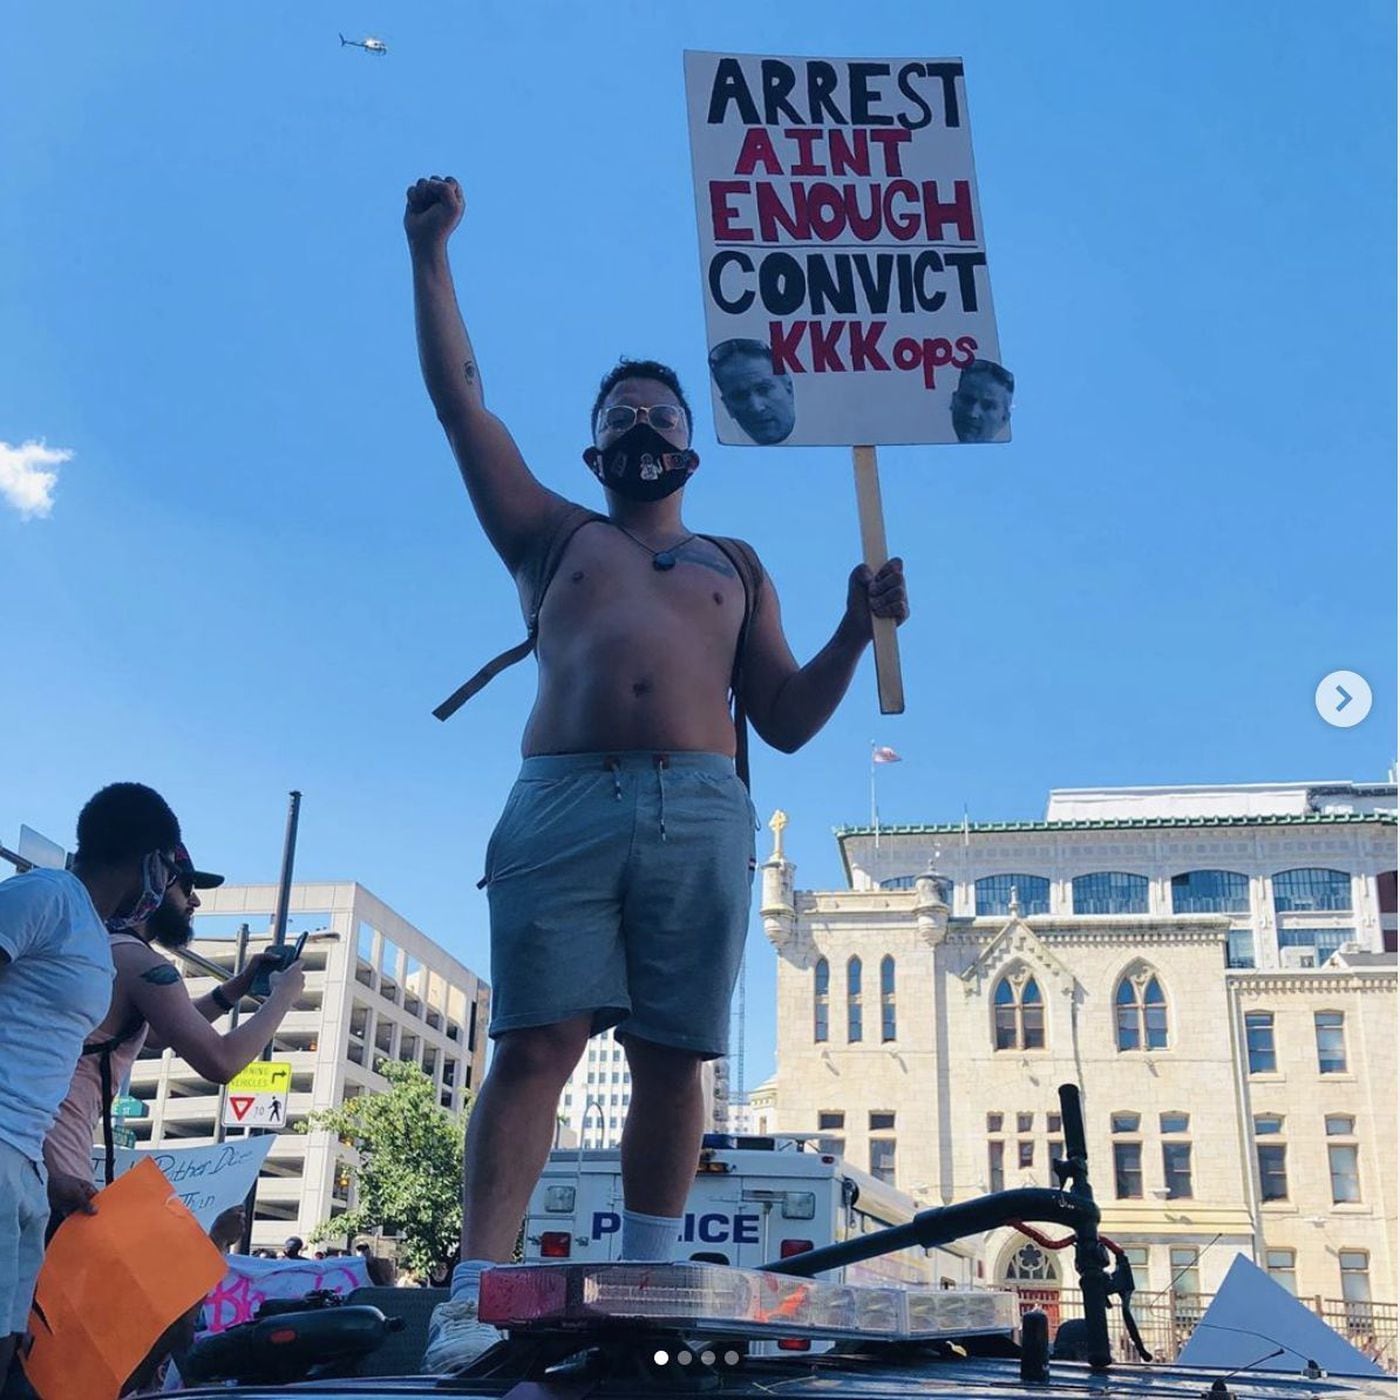 A photo posted to Francisco "Franky" Reyes' Instagram profile that Pennsylvania State Police said depicts him shirtless and standing atop a squad car he is charged with vandalizing during May 30 protests that erupted in Center City.